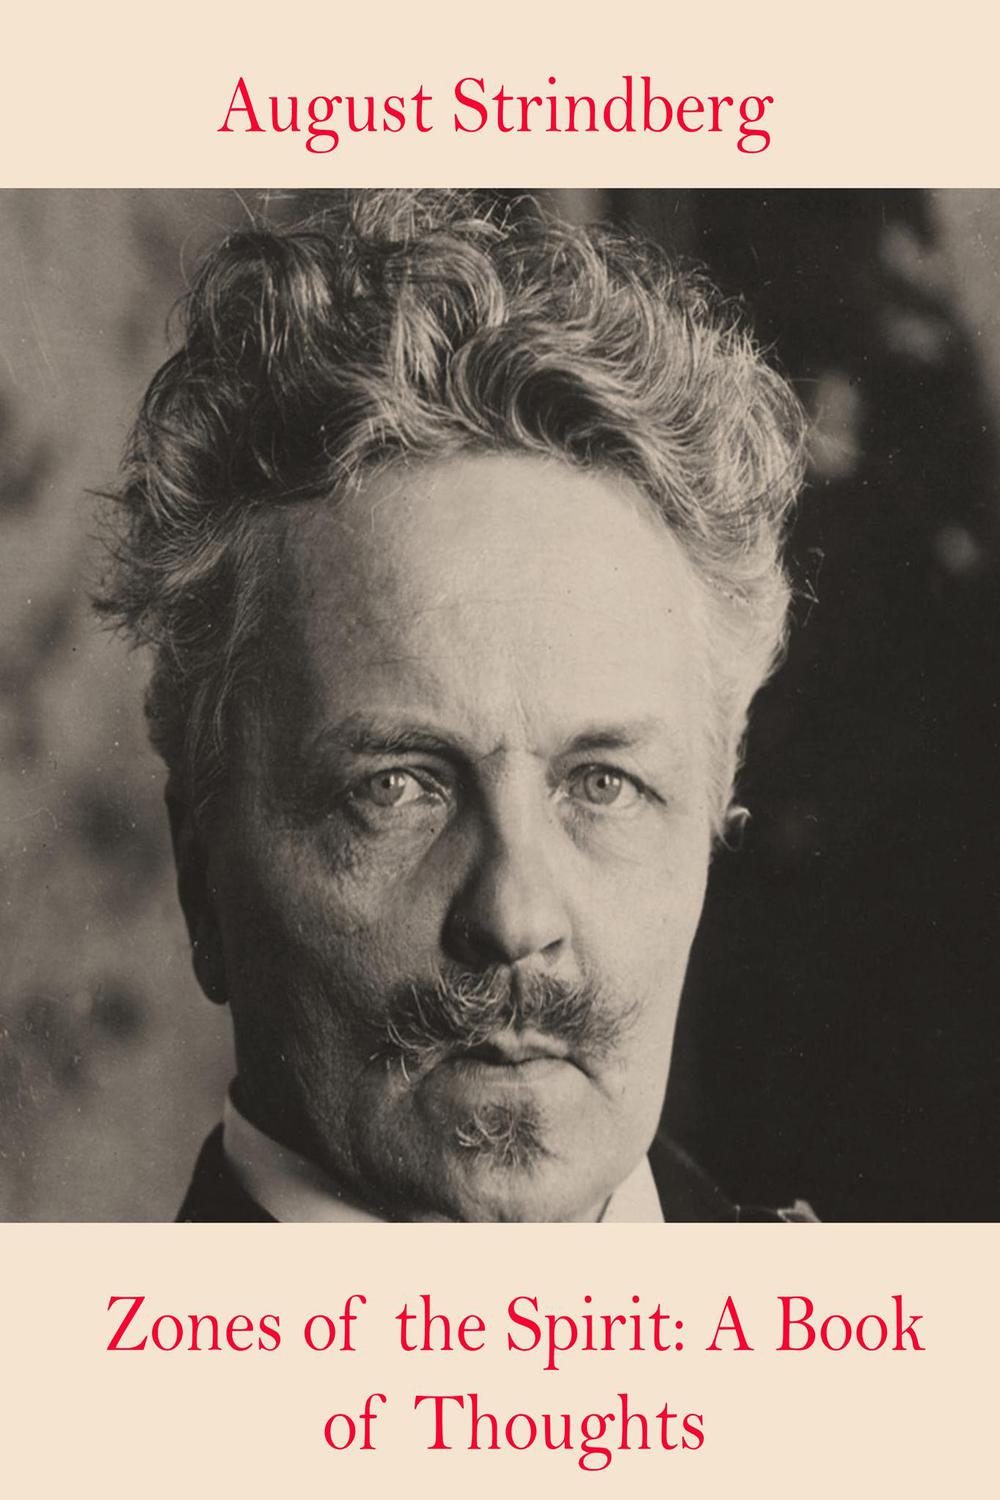 Zones of the Spirit: A Book of Thoughts - August Strindberg,,